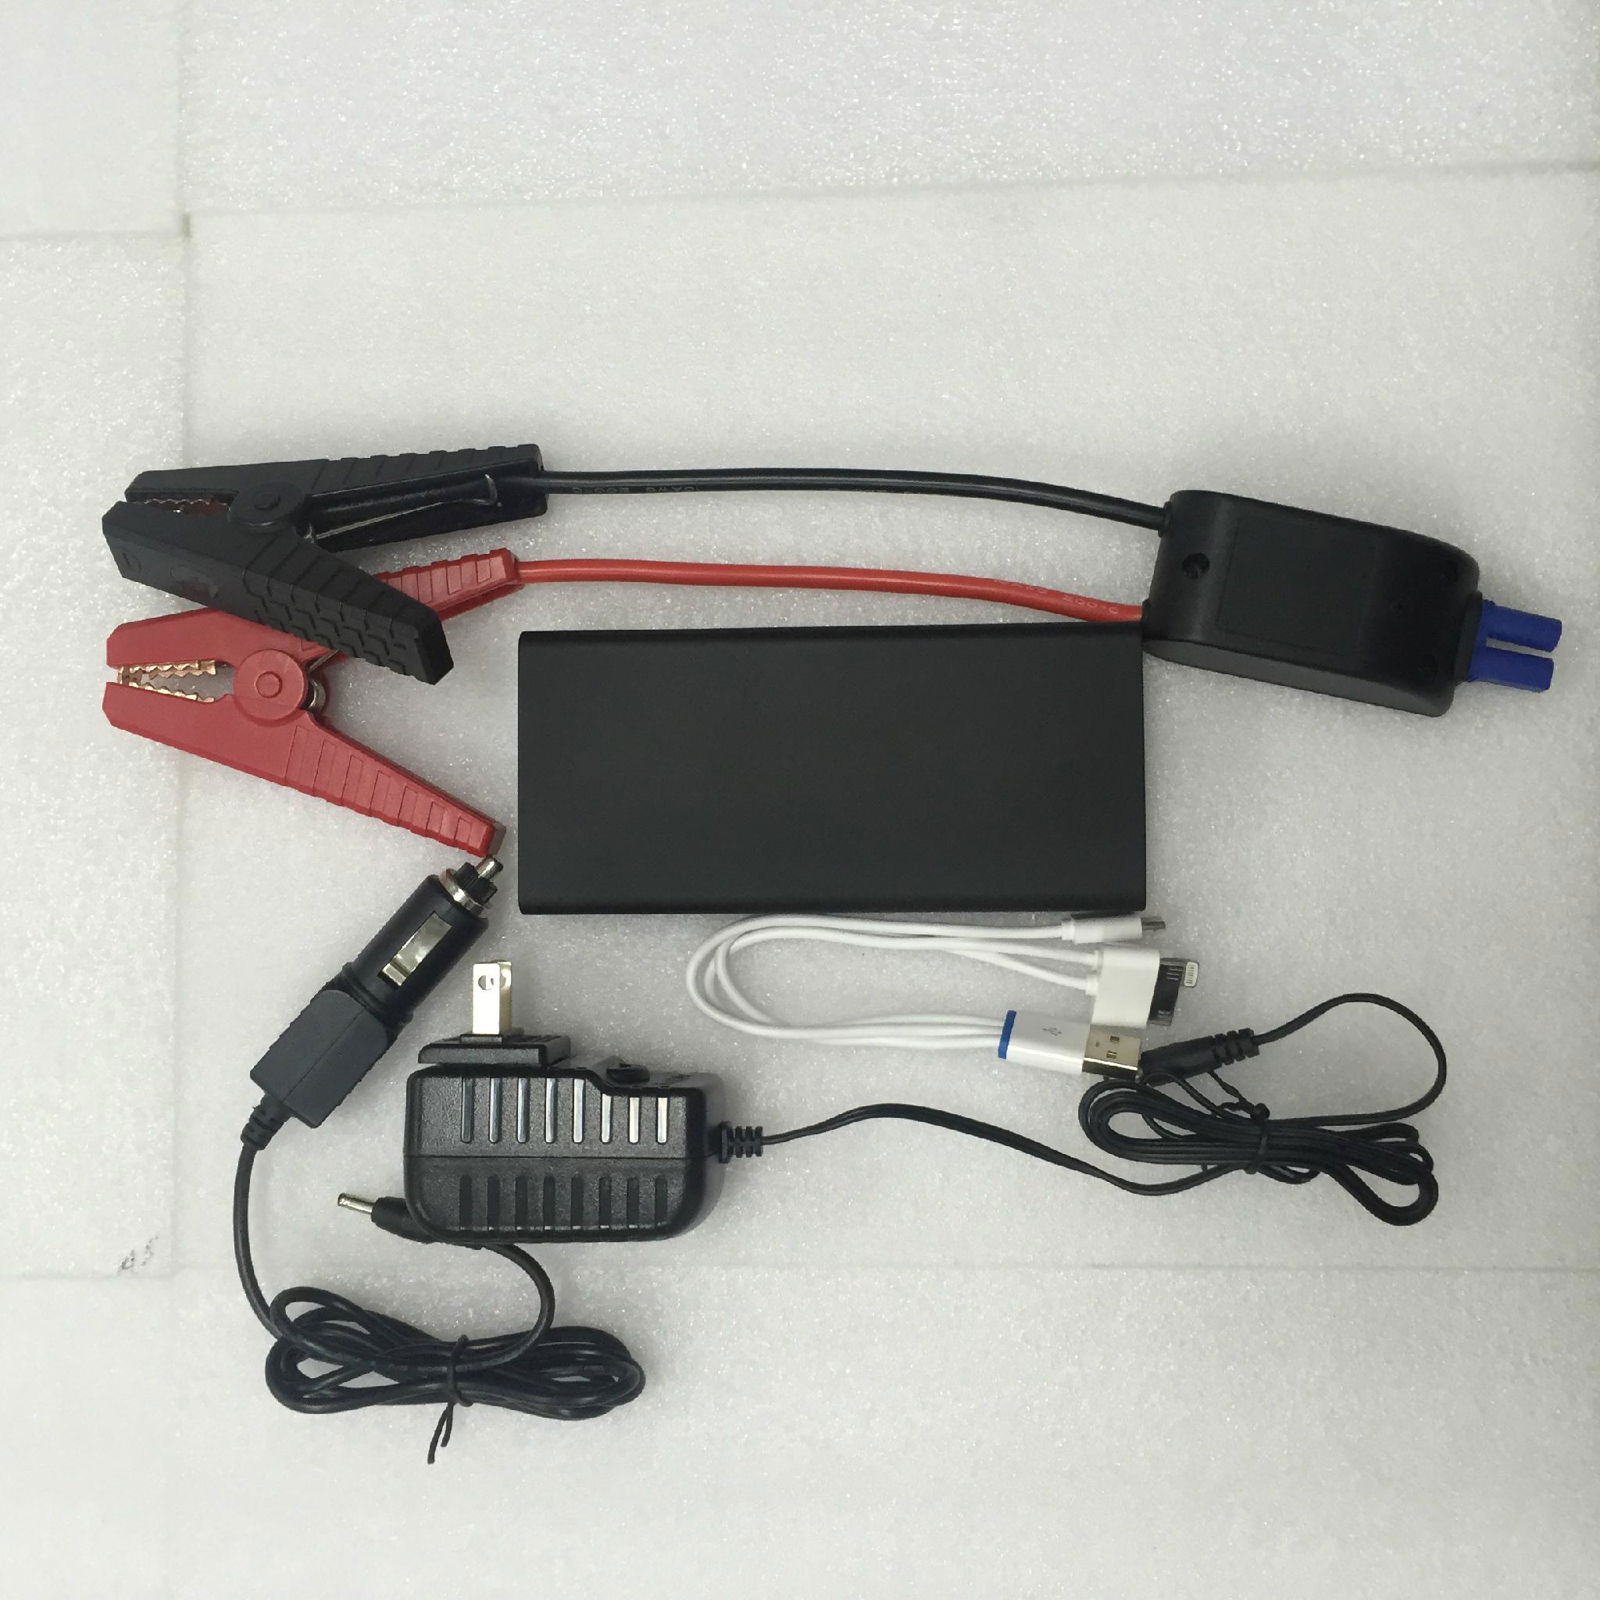 Portable jumper starter with power bank and flashlight 4